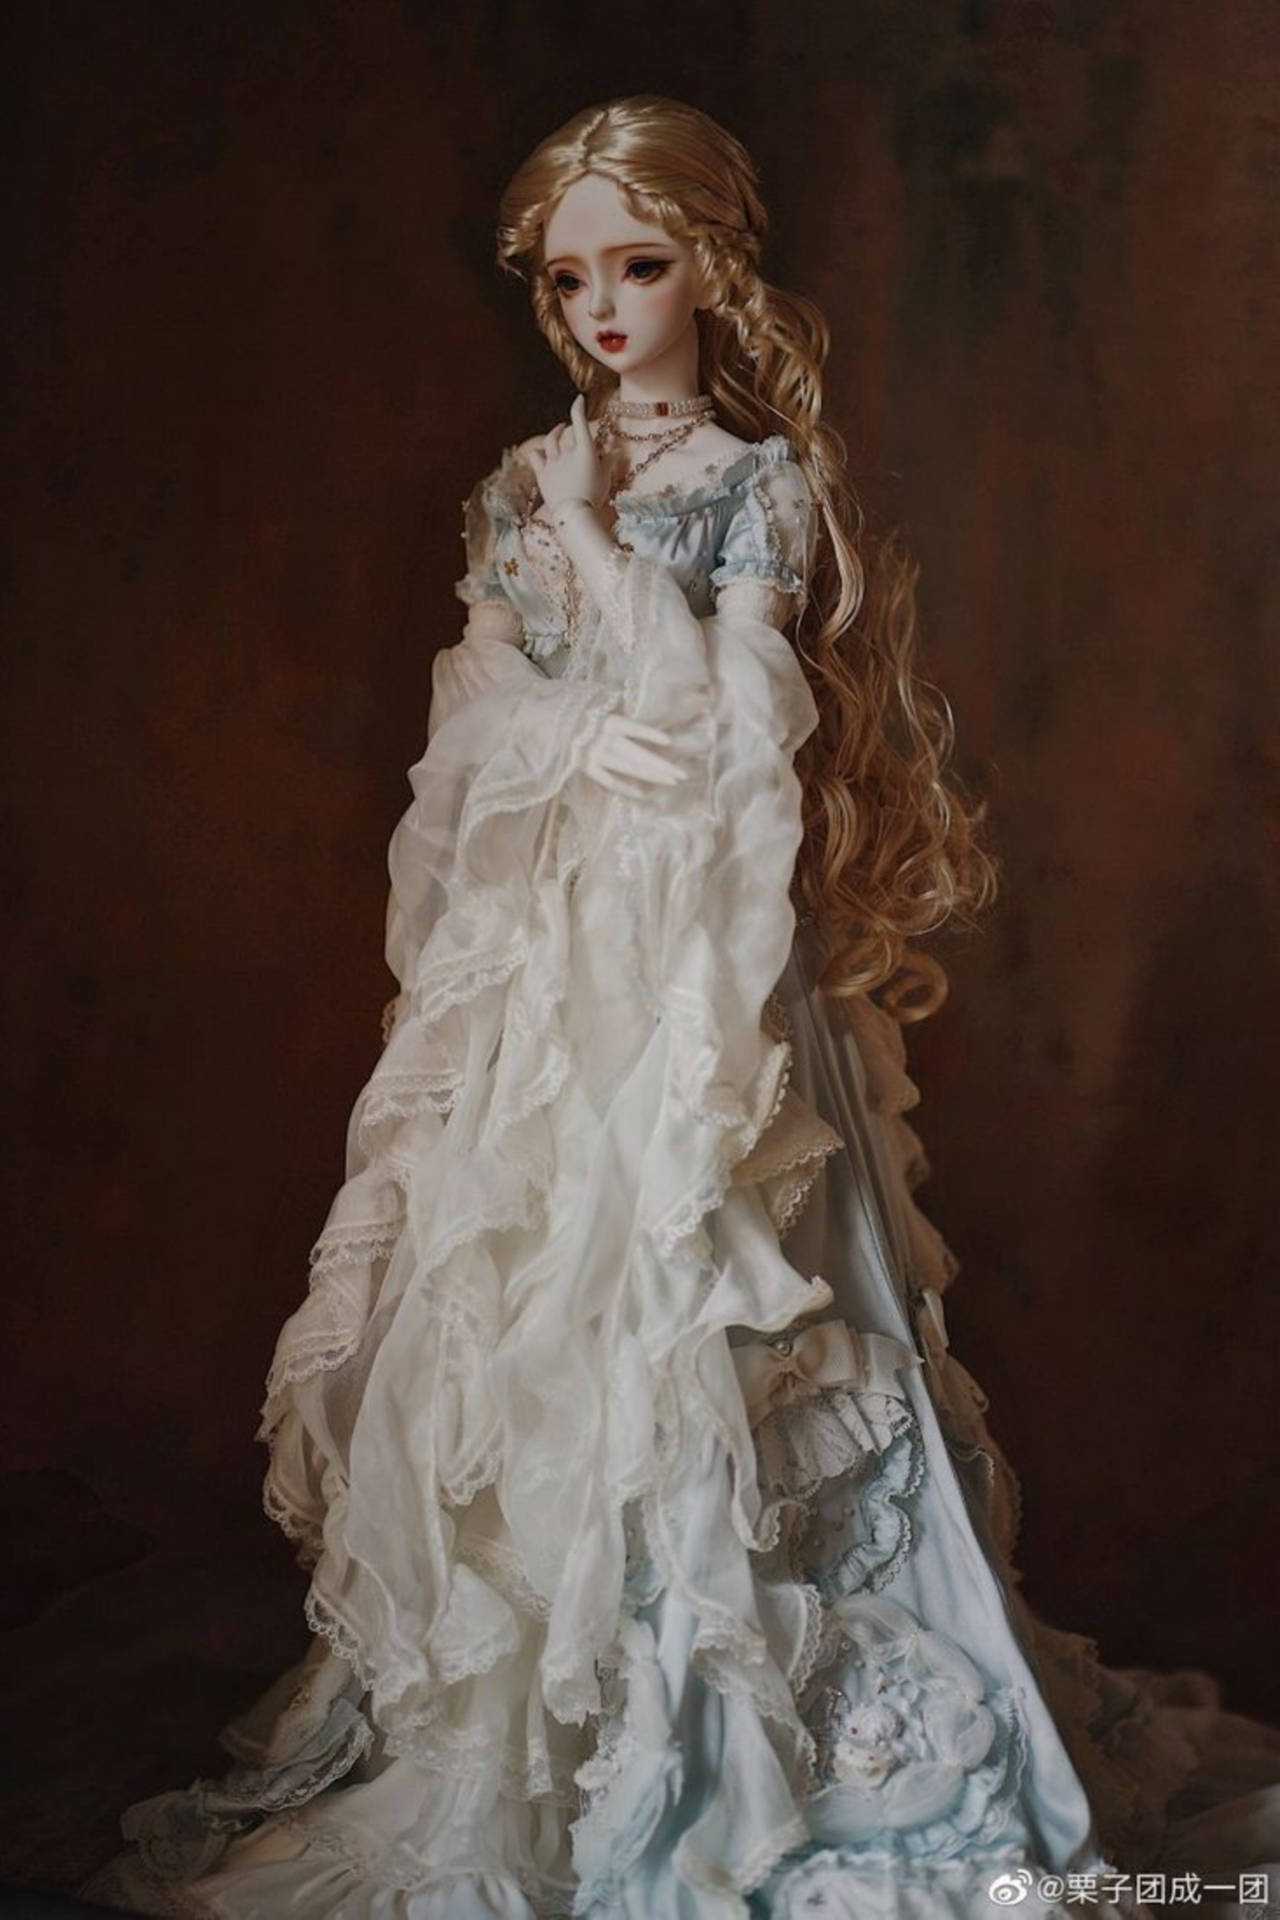 Graceful Barbie Doll Dressed In A Flowy Gown Background